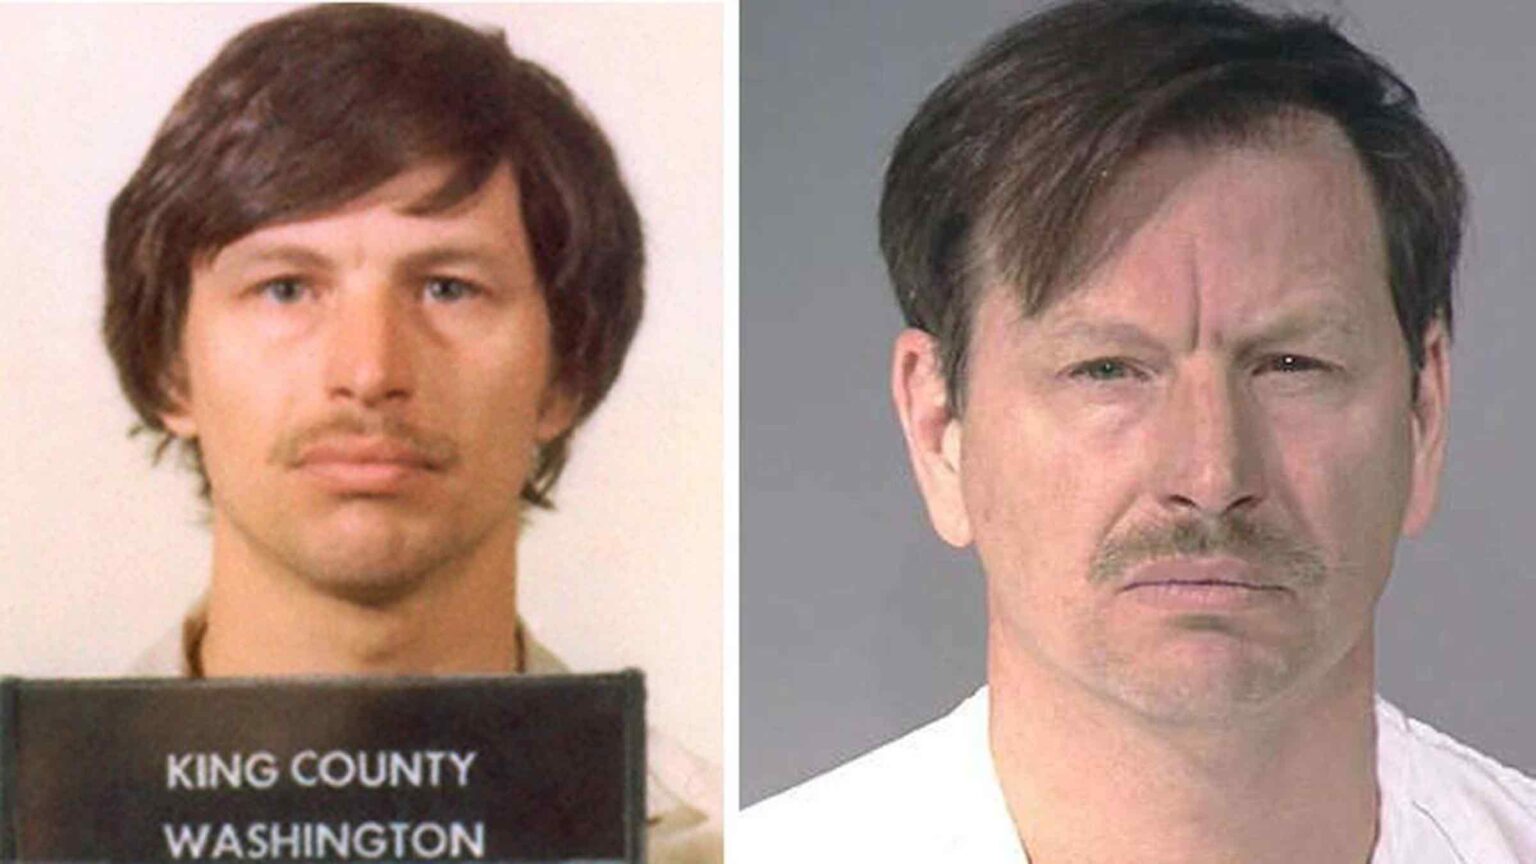 Gary Ridgway used to be considered the most prolific killer in American history. Here's everything you need to know about the Green River Killer.